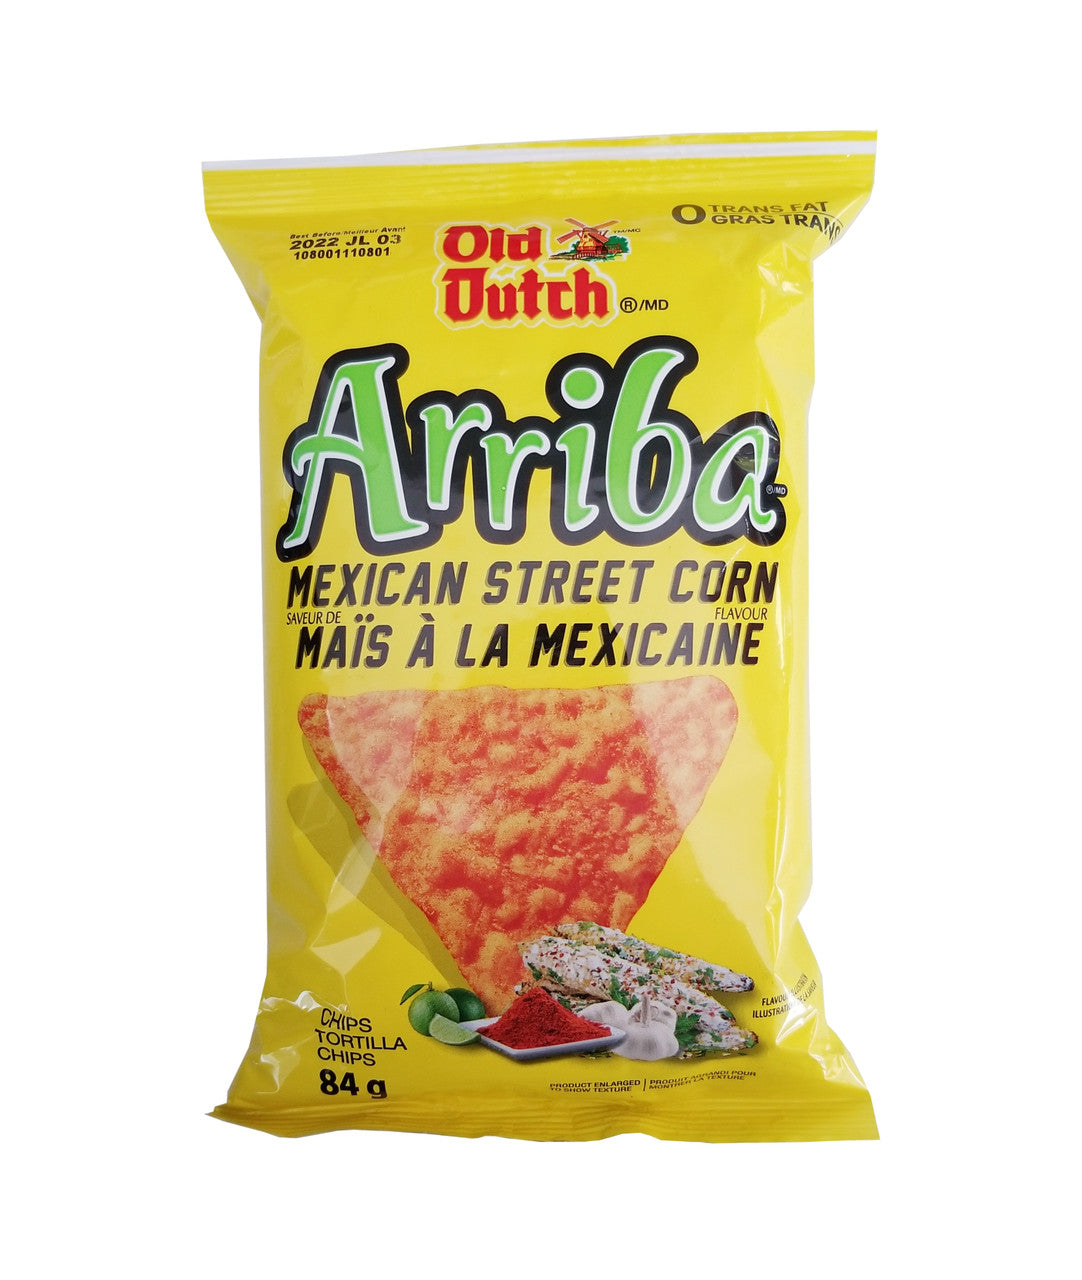 Old Dutch Arriba Tortilla Chips, Mexican Street Corn Flavor, 84g/3 oz., Bag, {Imported from Canada}